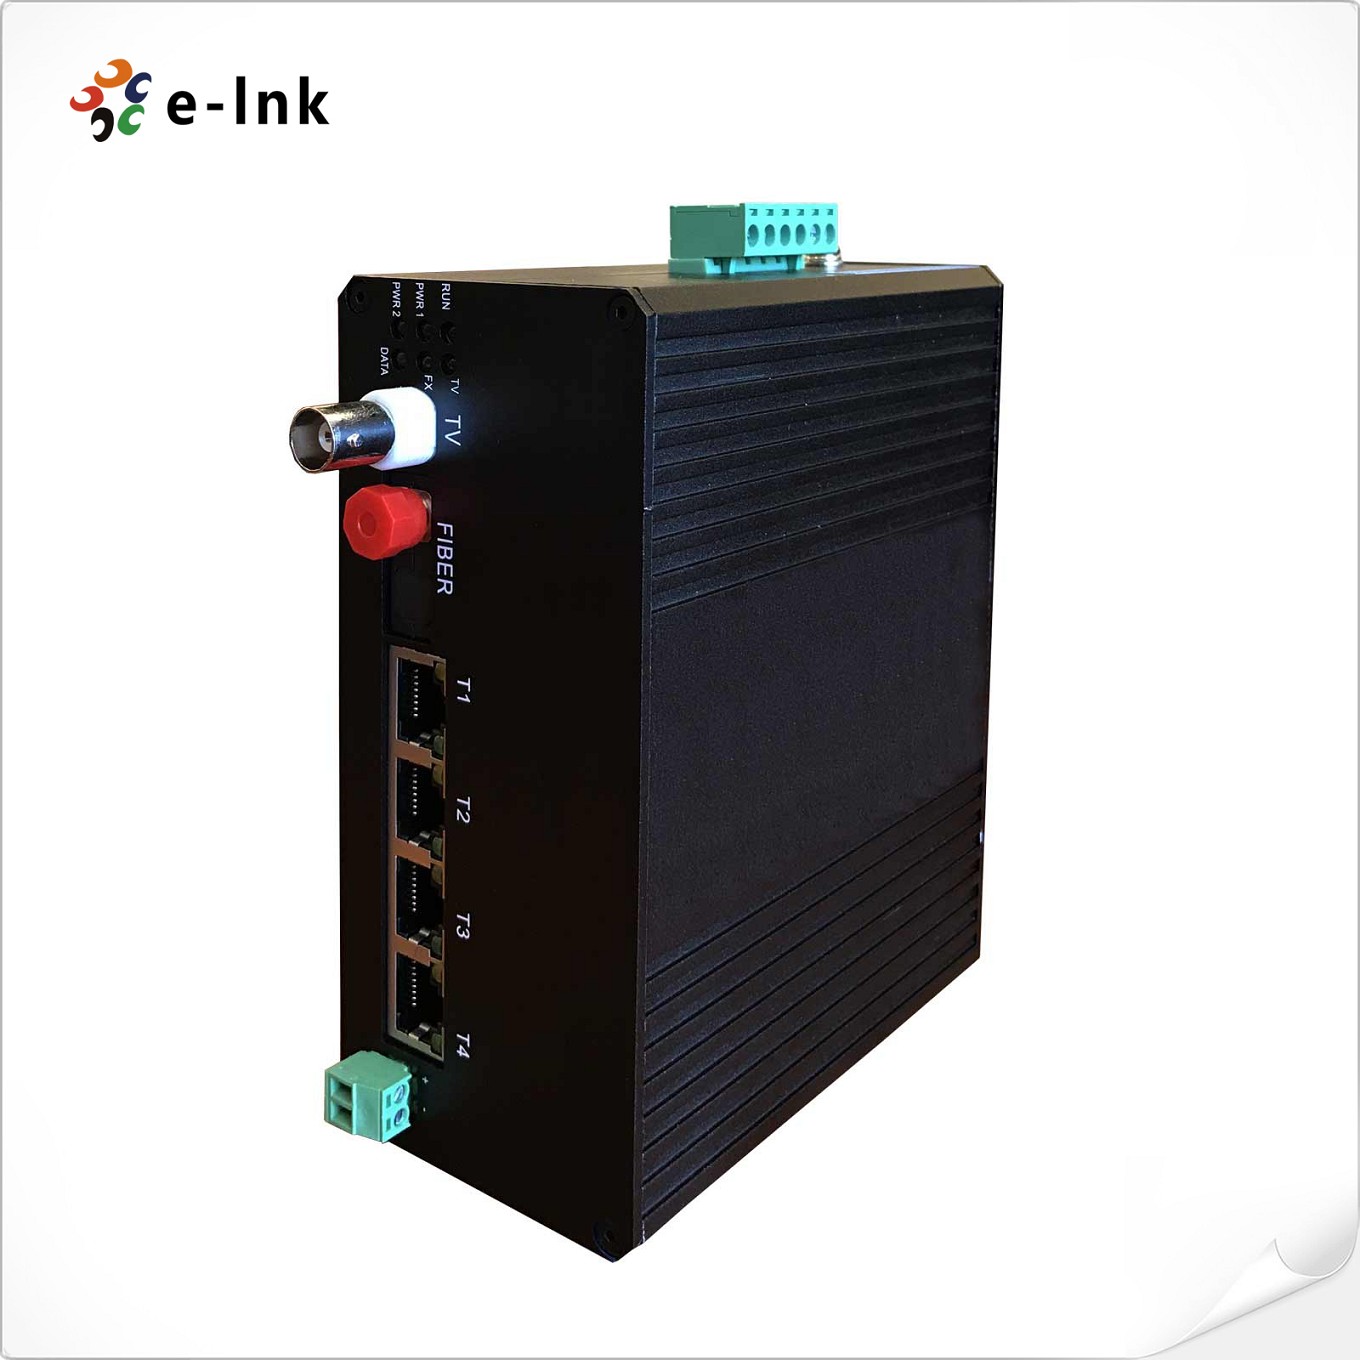 Industrial Video Ethernet Switch with 4x10/100M Ethernet + 1xVideo + 1xRS485 Data + 1xGigabit Fiber